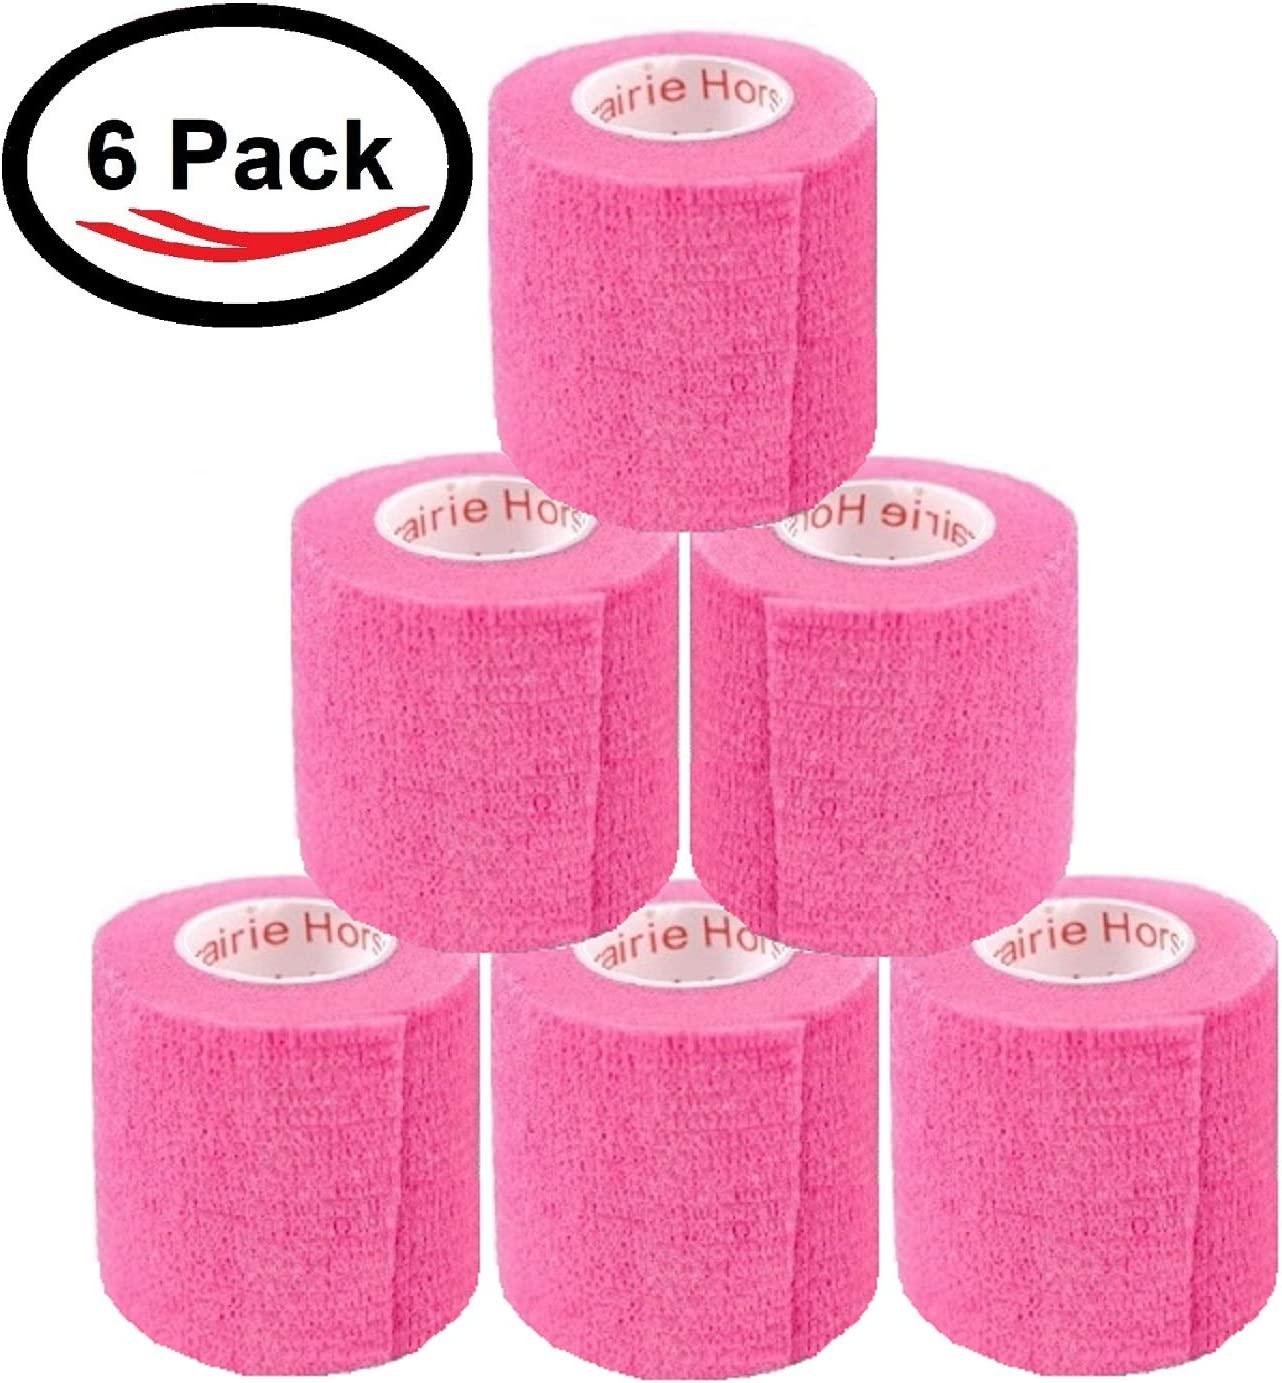 Unique Bargains 2 Pcs Pink 1 inch Width Athletic Sports Cotton Tape Ankle Knee Wrist Self Adhesive Tape